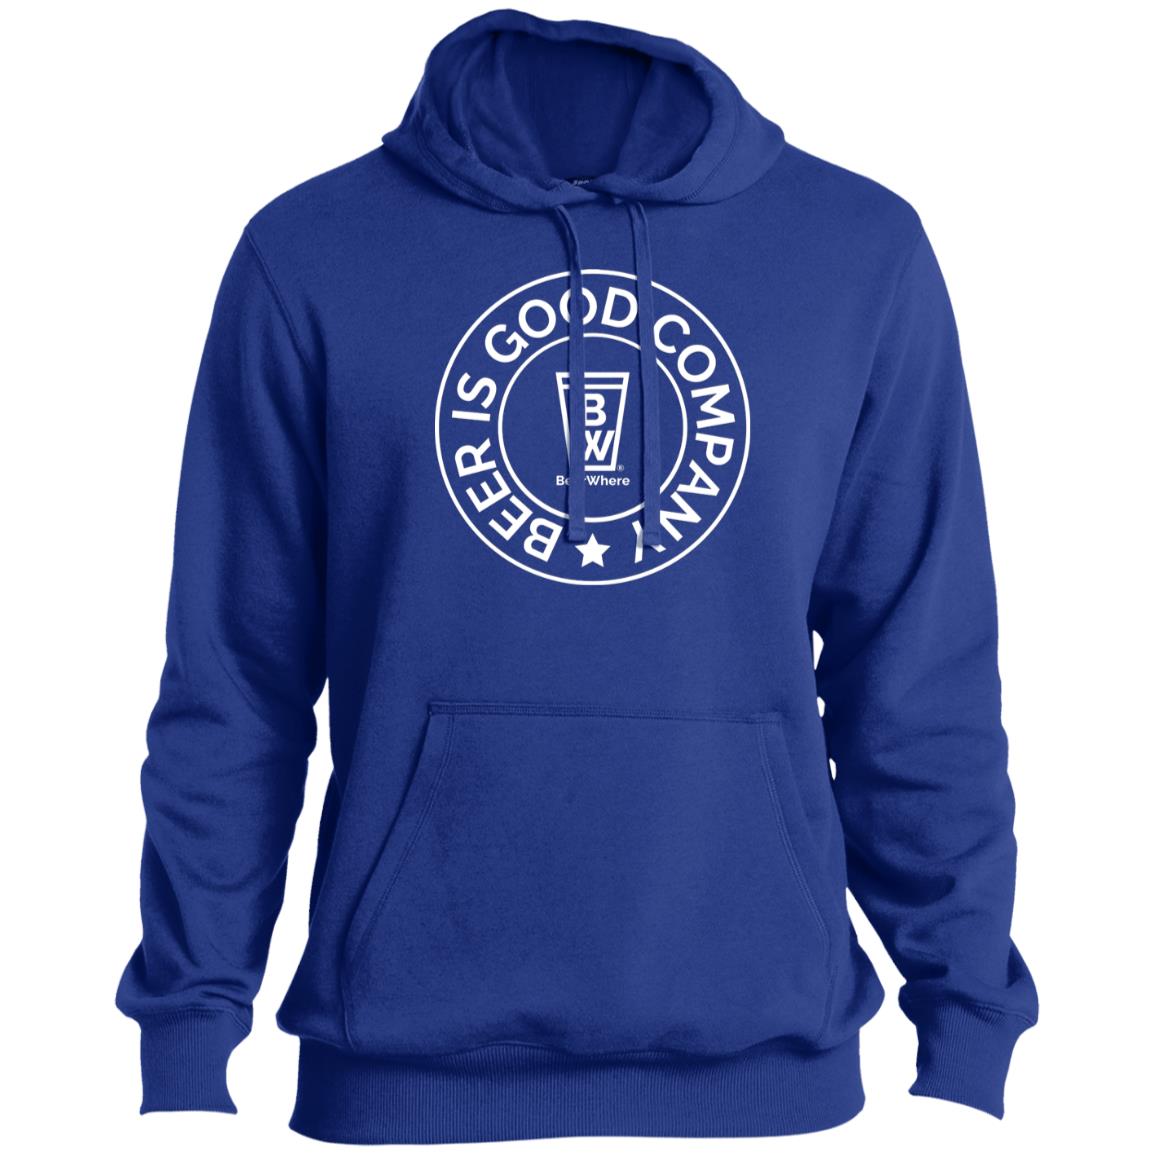 Good Company Pullover Hoodie